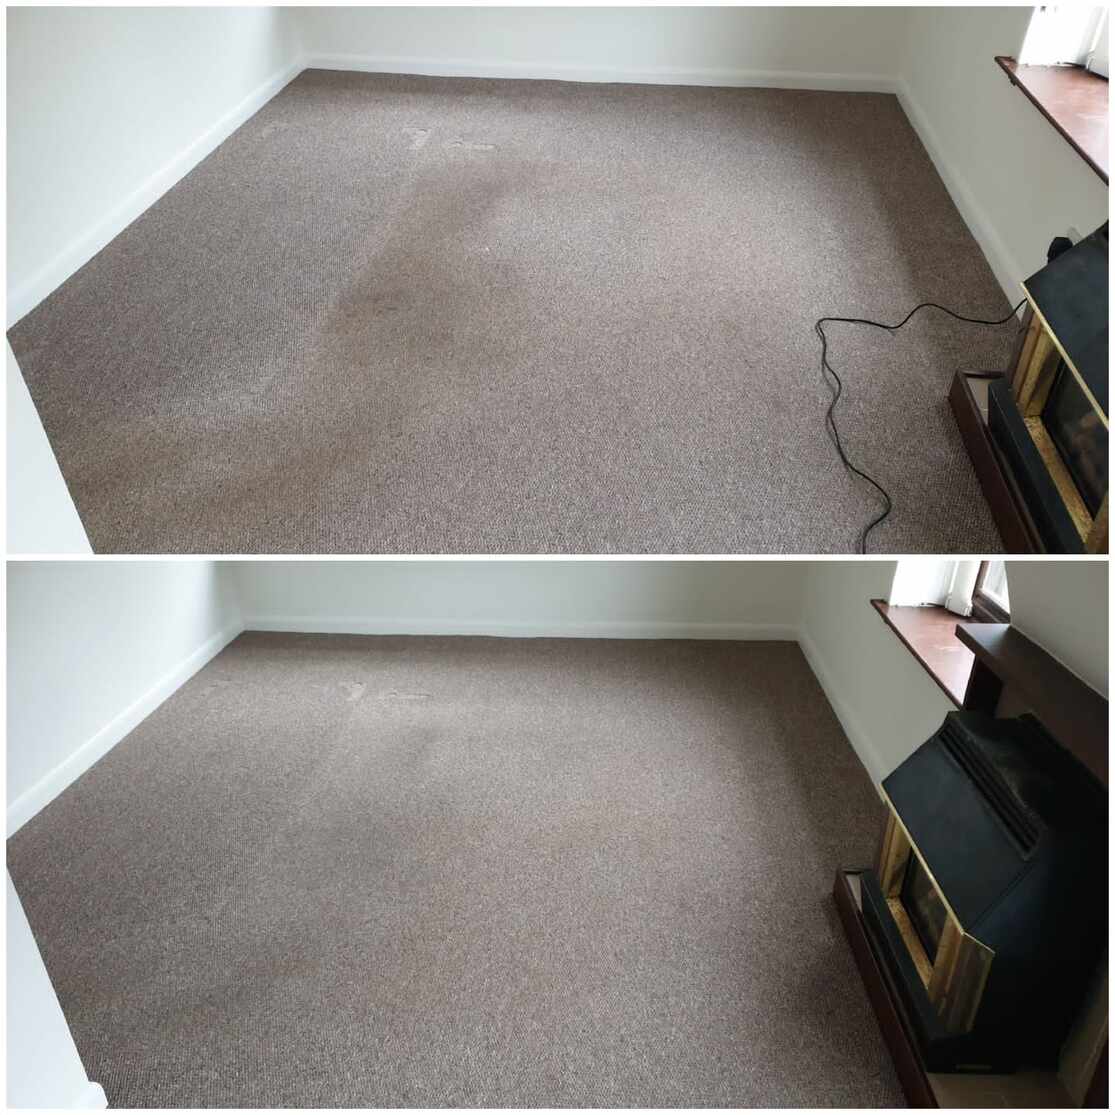 Carpet before and after